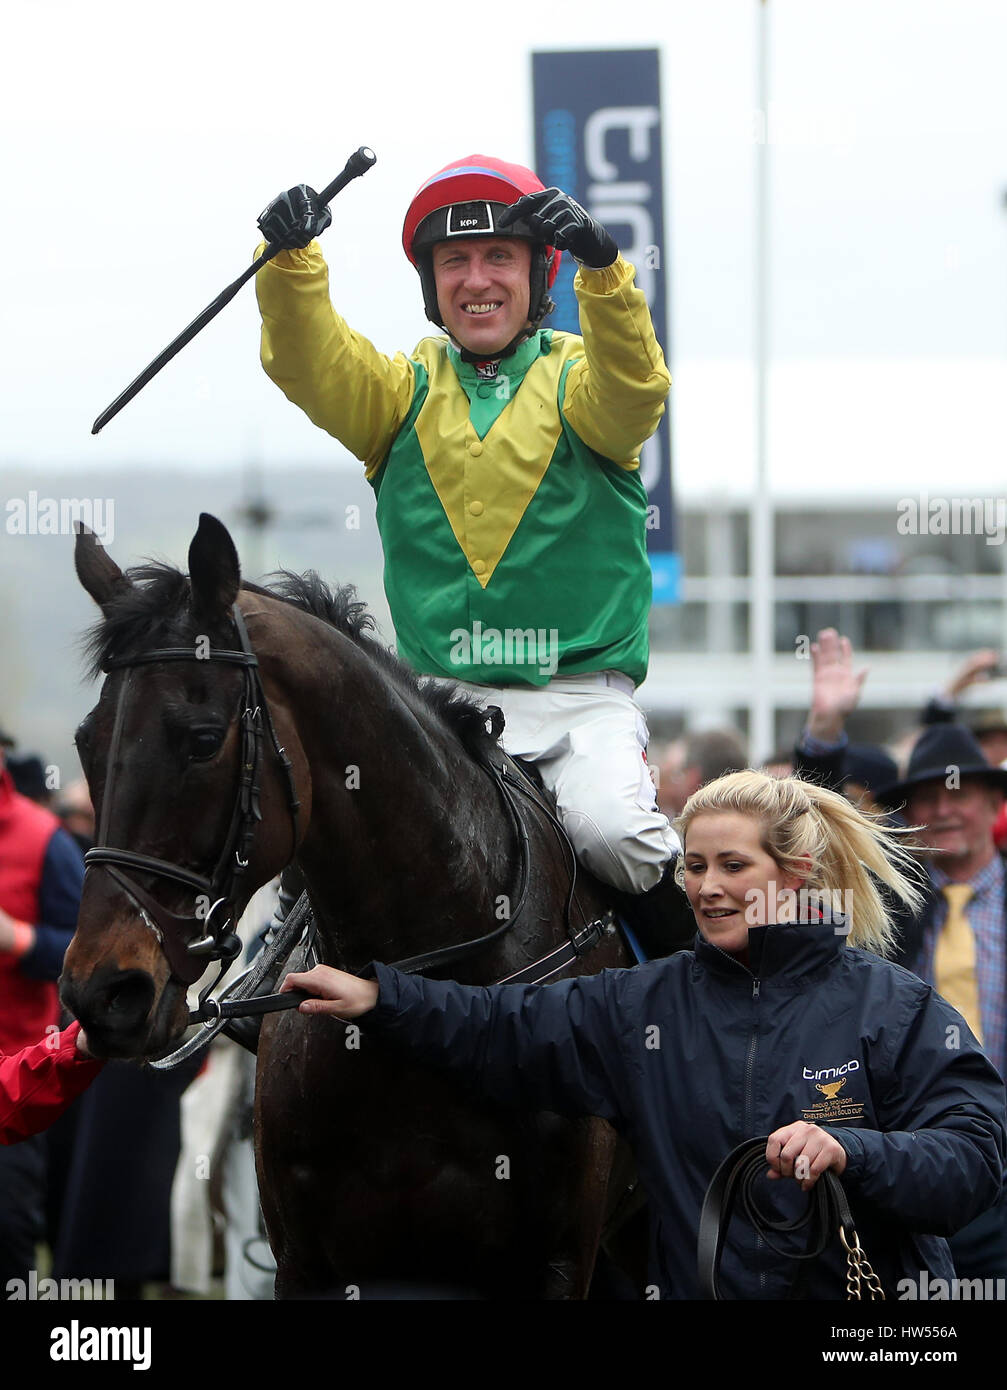 Jockey Robbie Power celebrates after his winning ride on Sizing John in the Timico Cheltenham Gold Cup Chase during Gold Cup Day of the 2017 Cheltenham Festival at Cheltenham Racecourse. Stock Photo